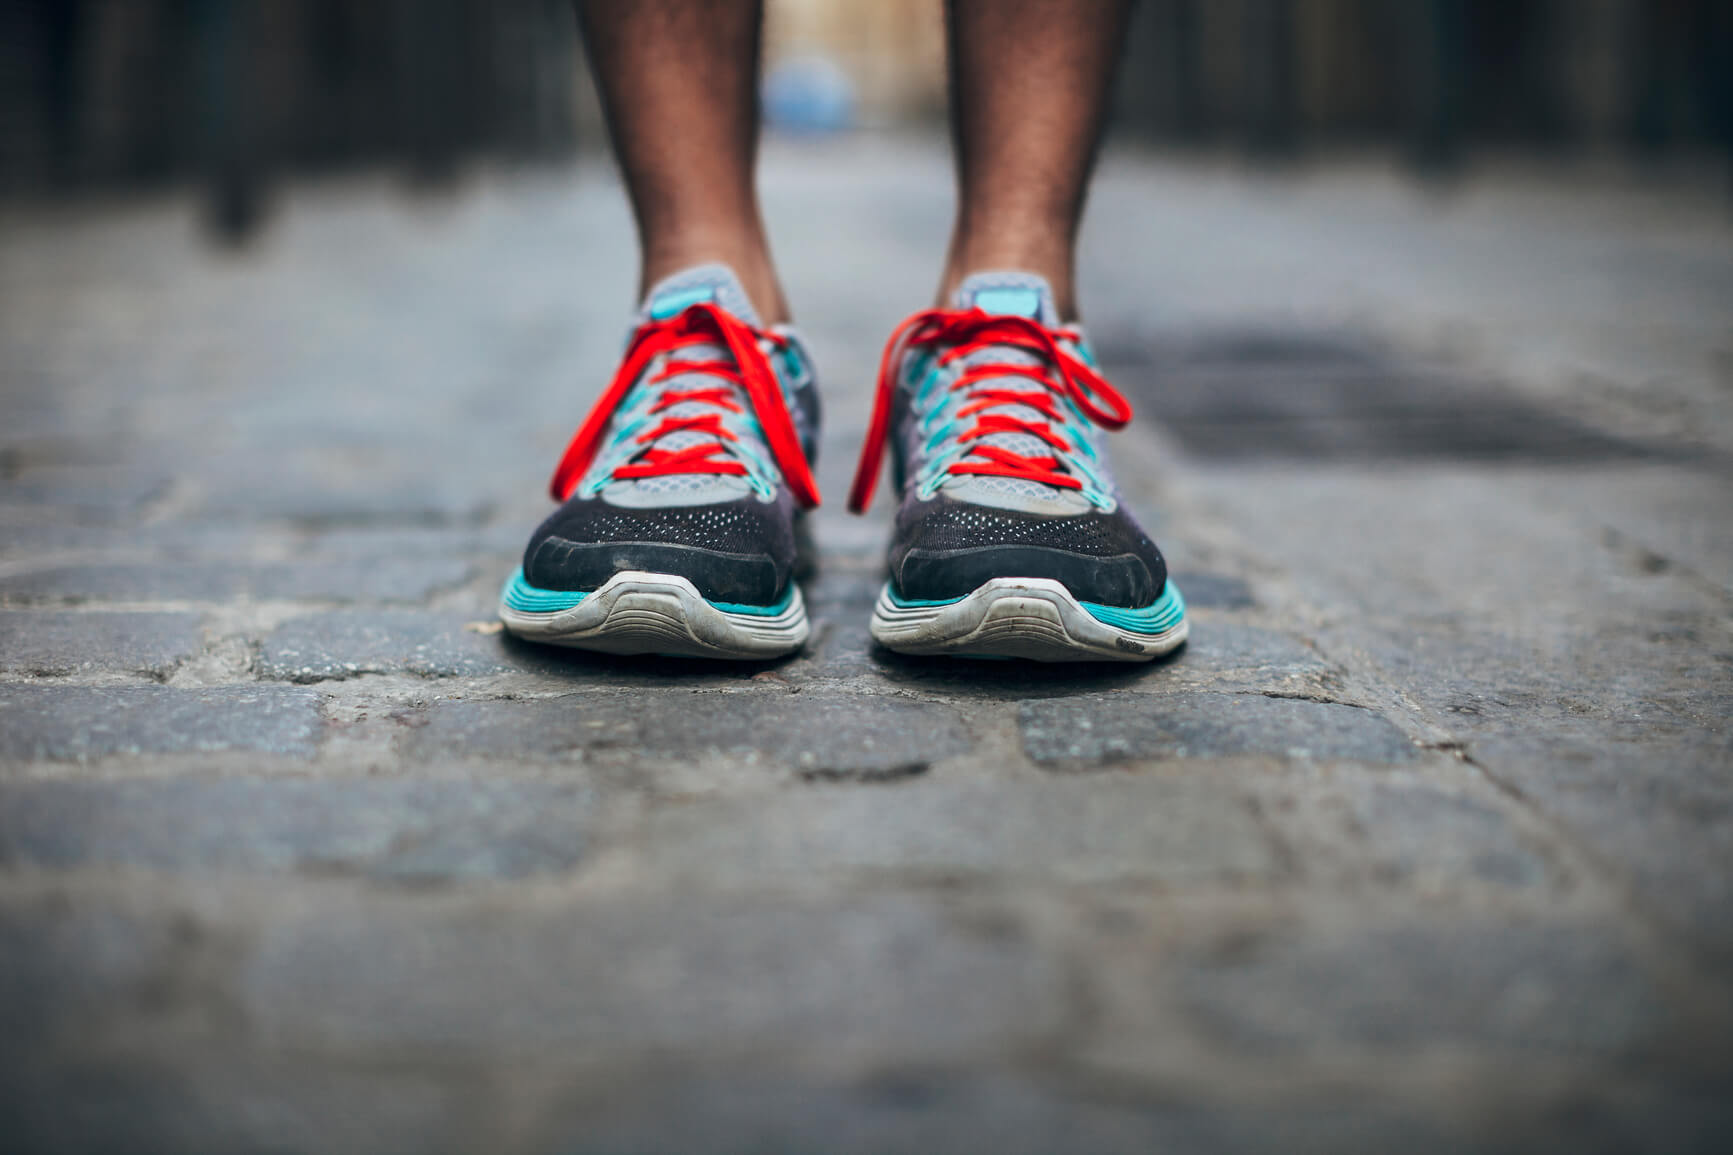 How to choose the best running shoes